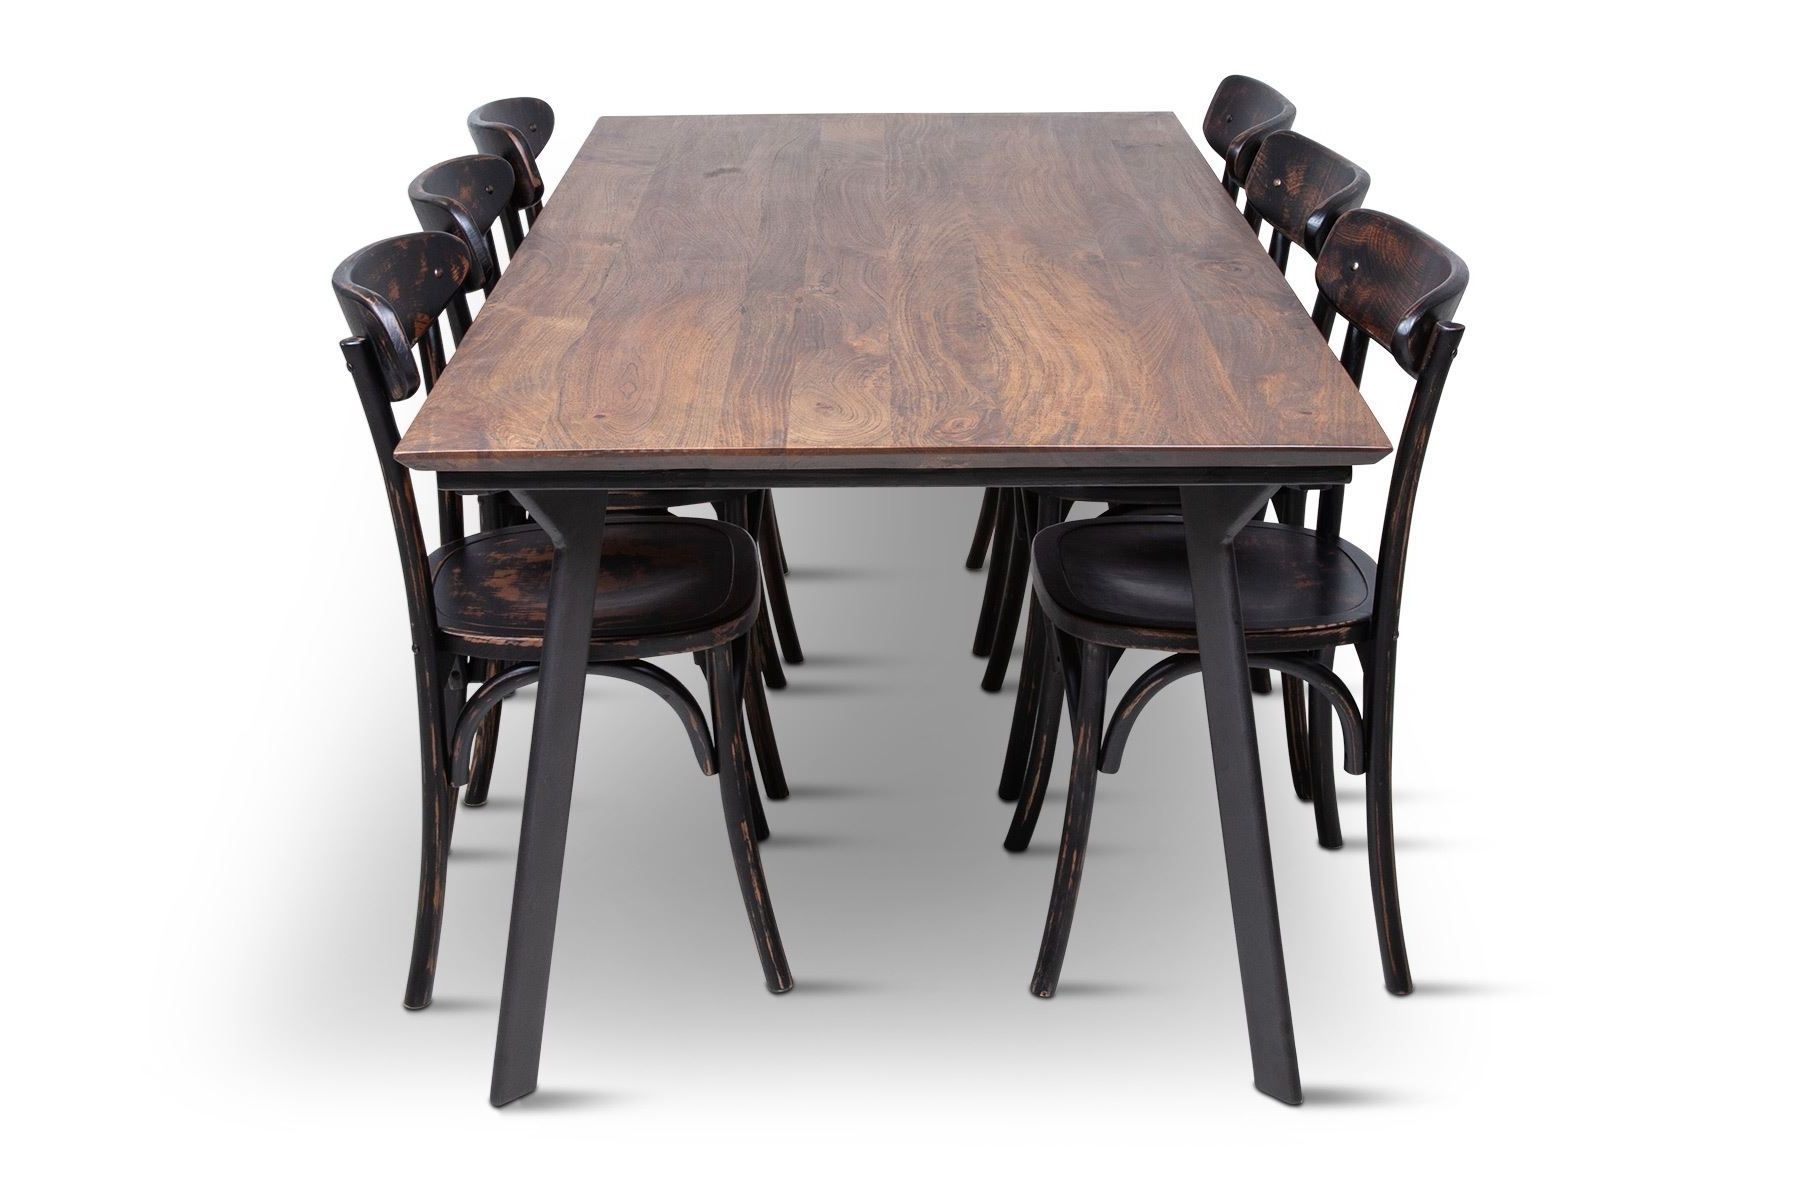 Rice Furniture. California 2100 Dining Table With 6 Benson Dining Chair Intended For Latest Benson Rectangle Dining Tables (Photo 9 of 25)